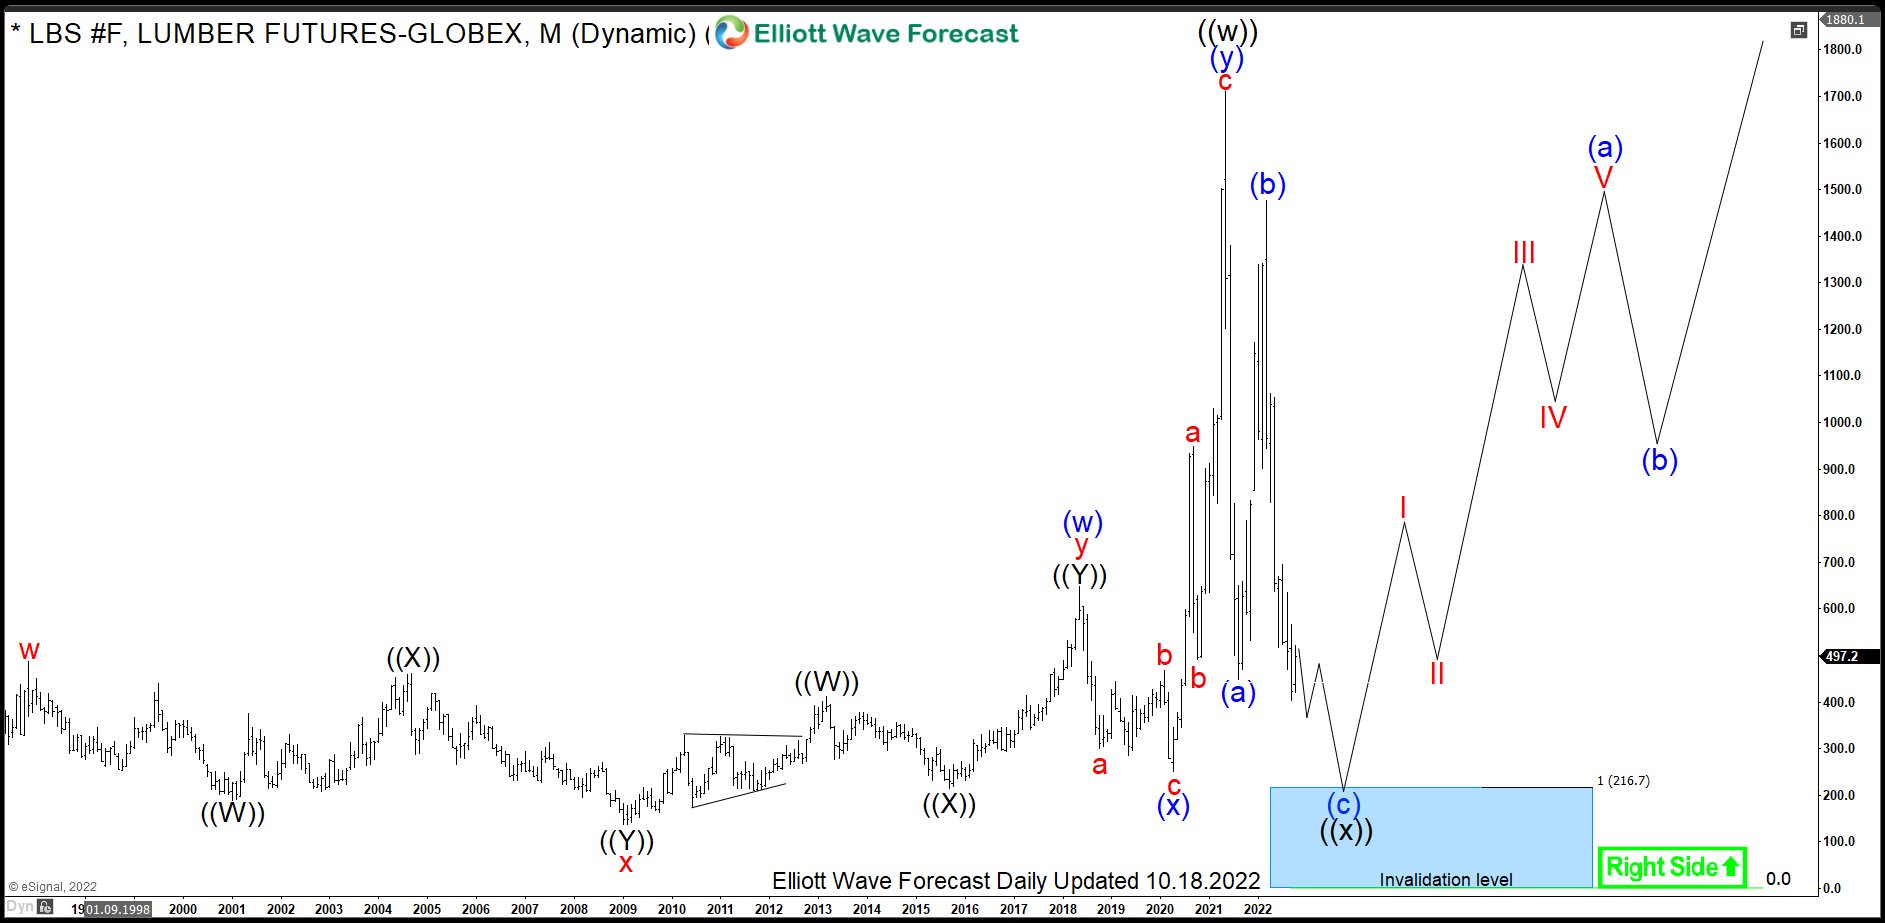 Lumber ($LBS) Futures Prices in a Historic Double Correction - Elliott Wave Forecast